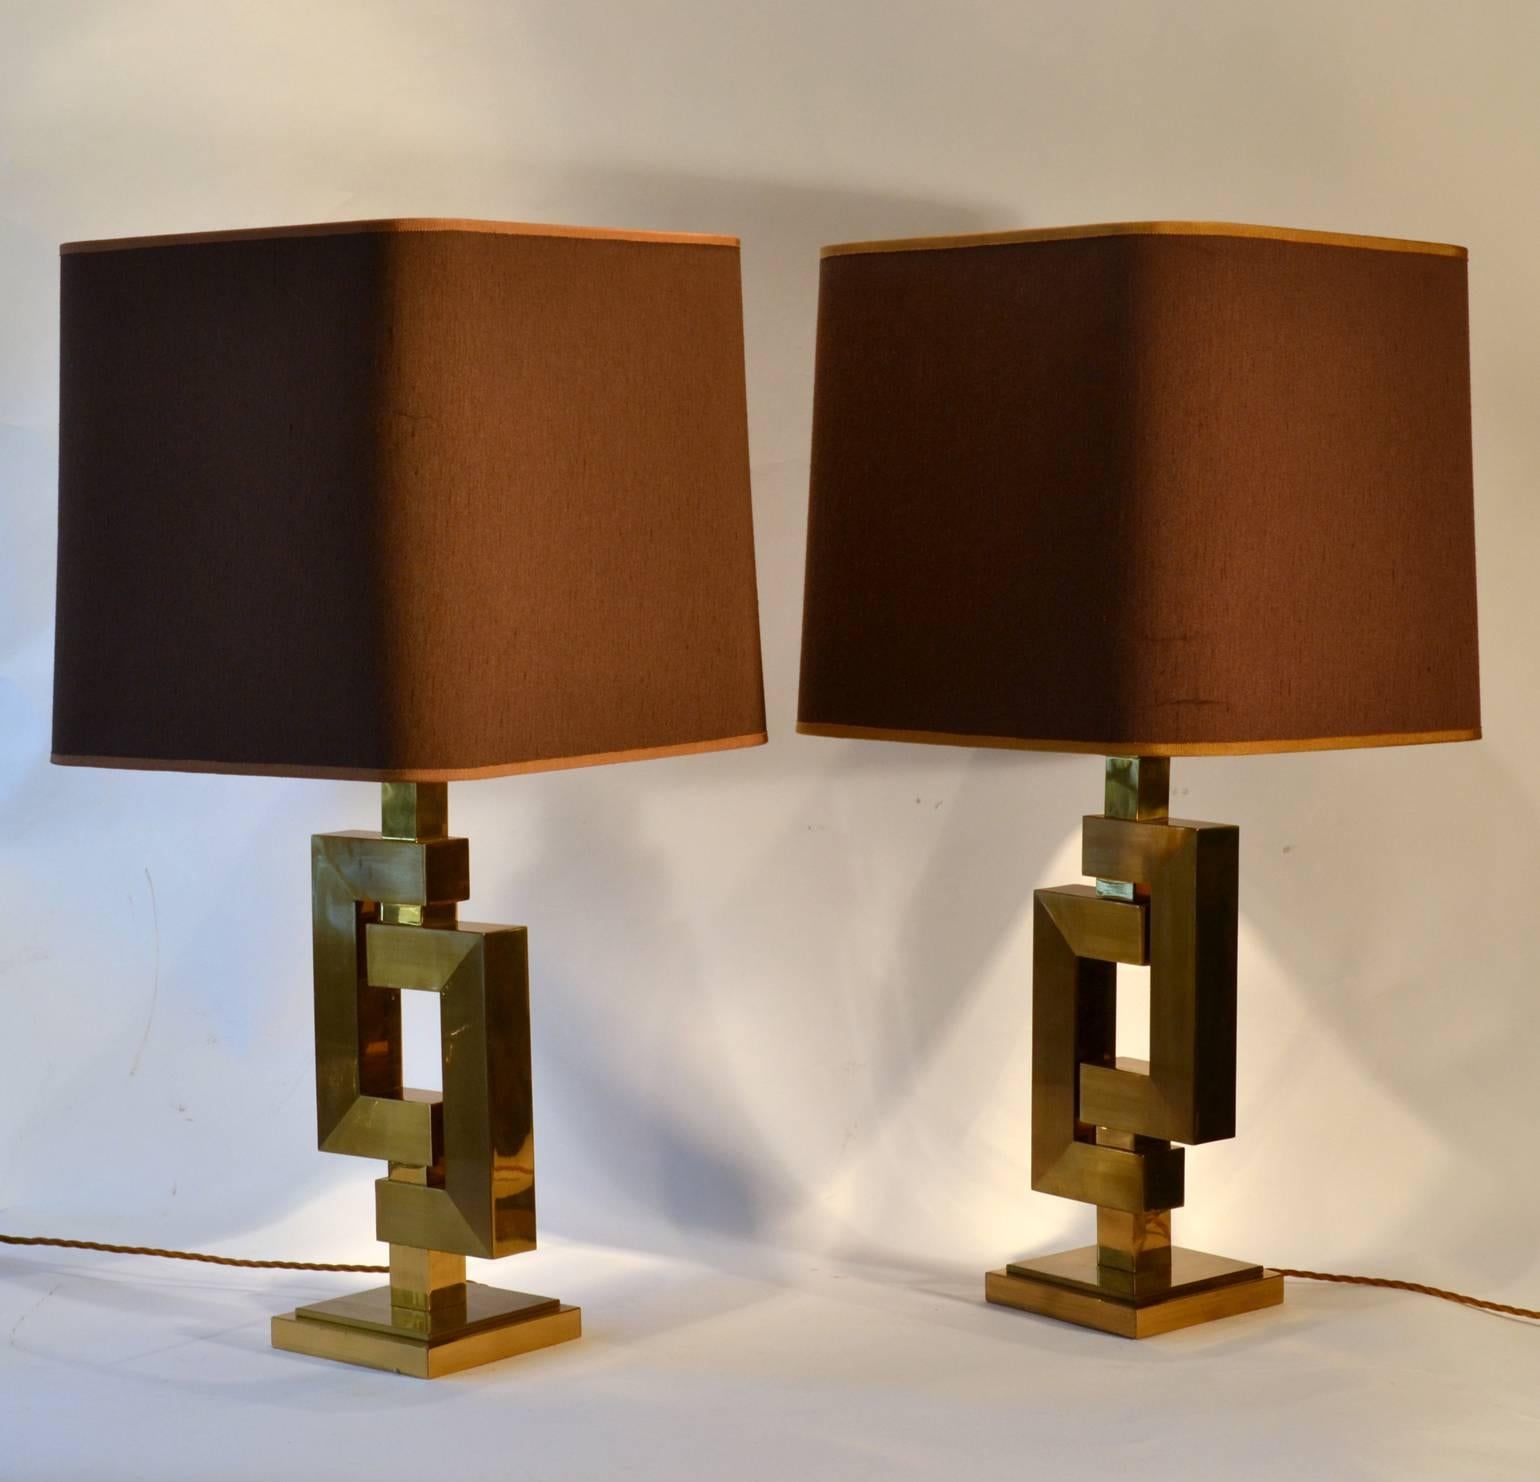 Pair of sculptural geometric table lamps in alternating polished and brushed brass finish square tubular sections. Mid-Century Modern lamps are ready for delivery. The shades are not included.

Dimensions bases:
Width 15 x 14 cm
Height 42 cm.